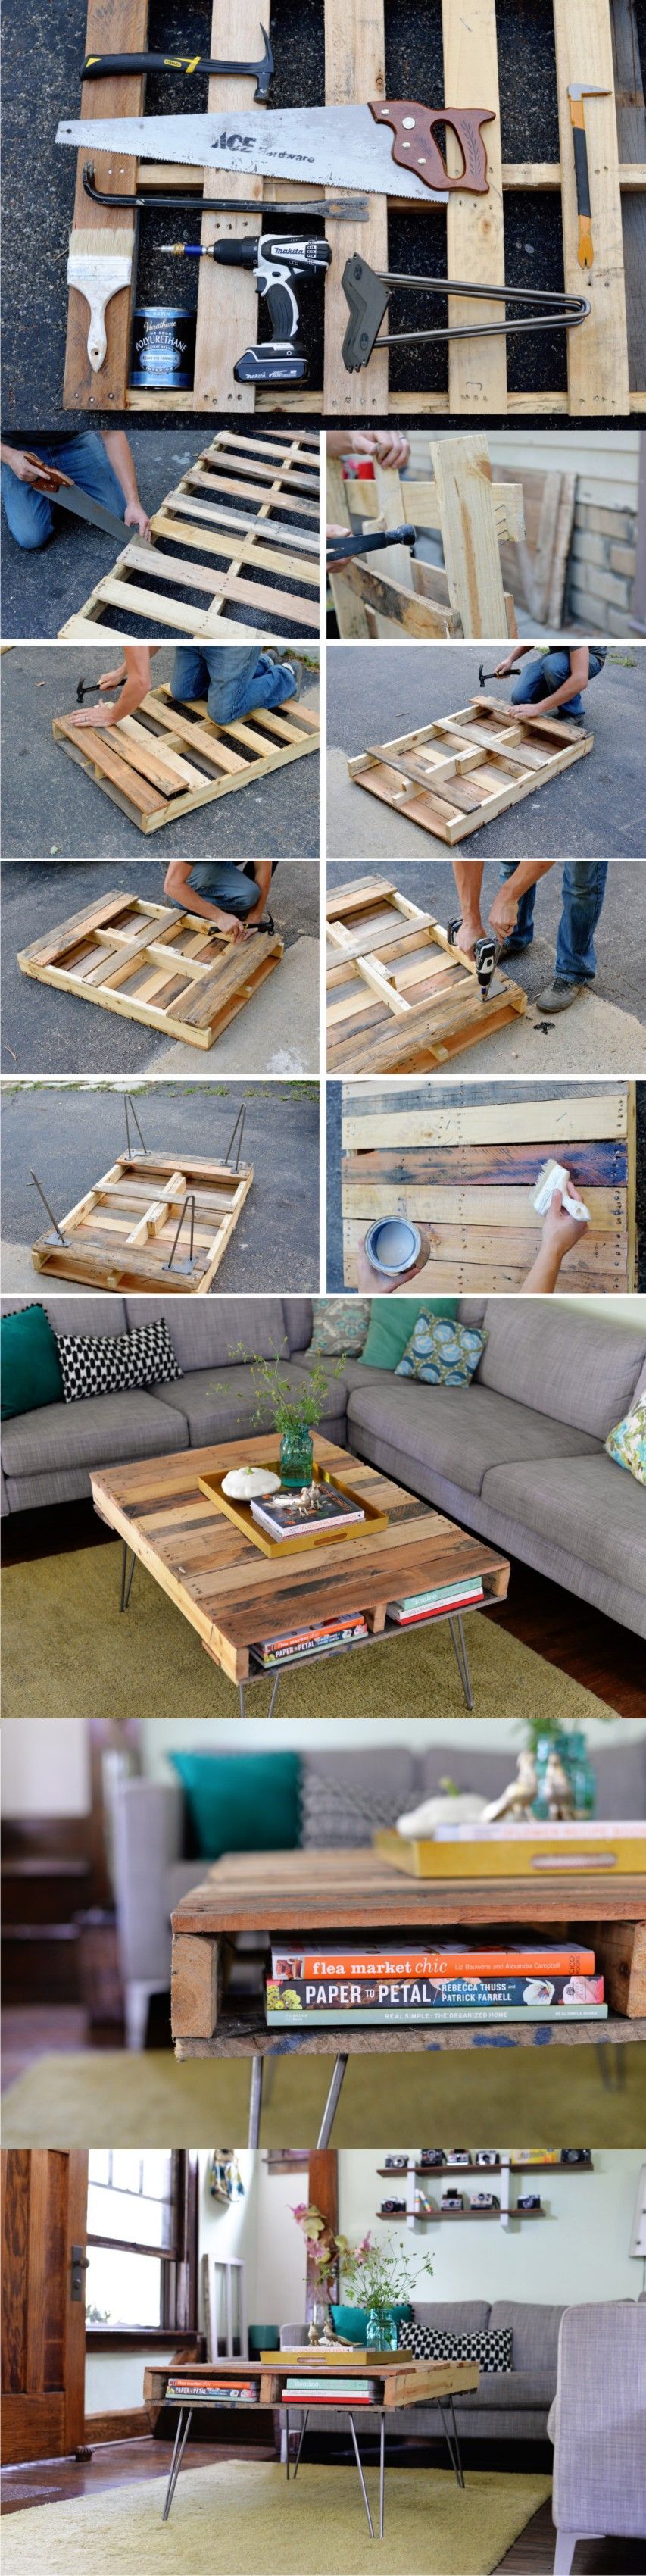 Pallet Coffee Table @Kristina Kobes this made me think of you because of the legs. I think it’s cool :)